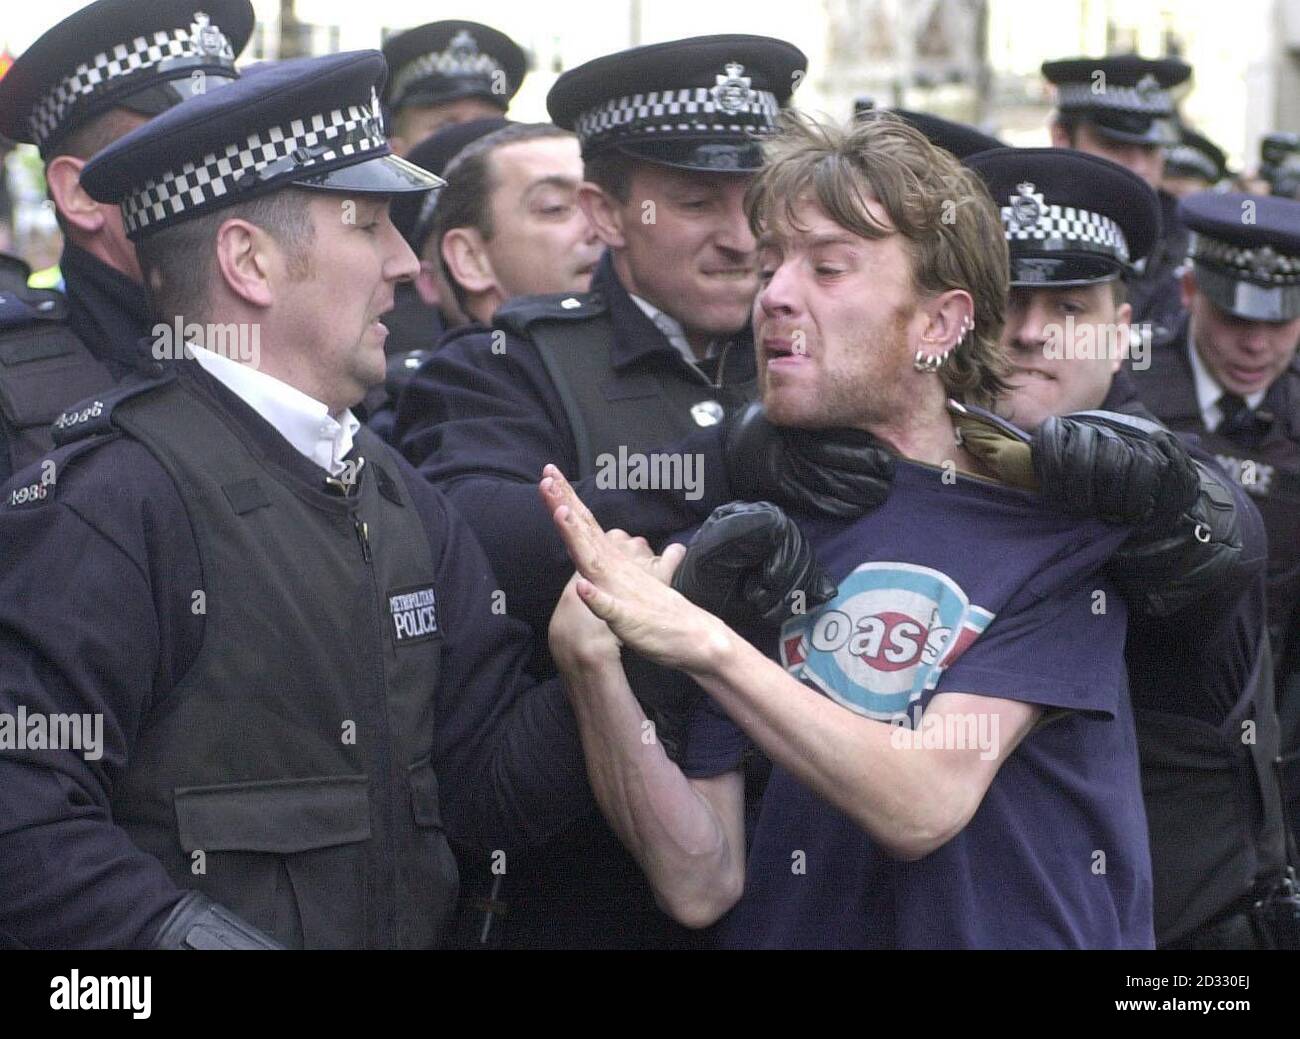 A protester is detained by police during a May Day demonstration in London's Trafalgar Square. Stock Photo